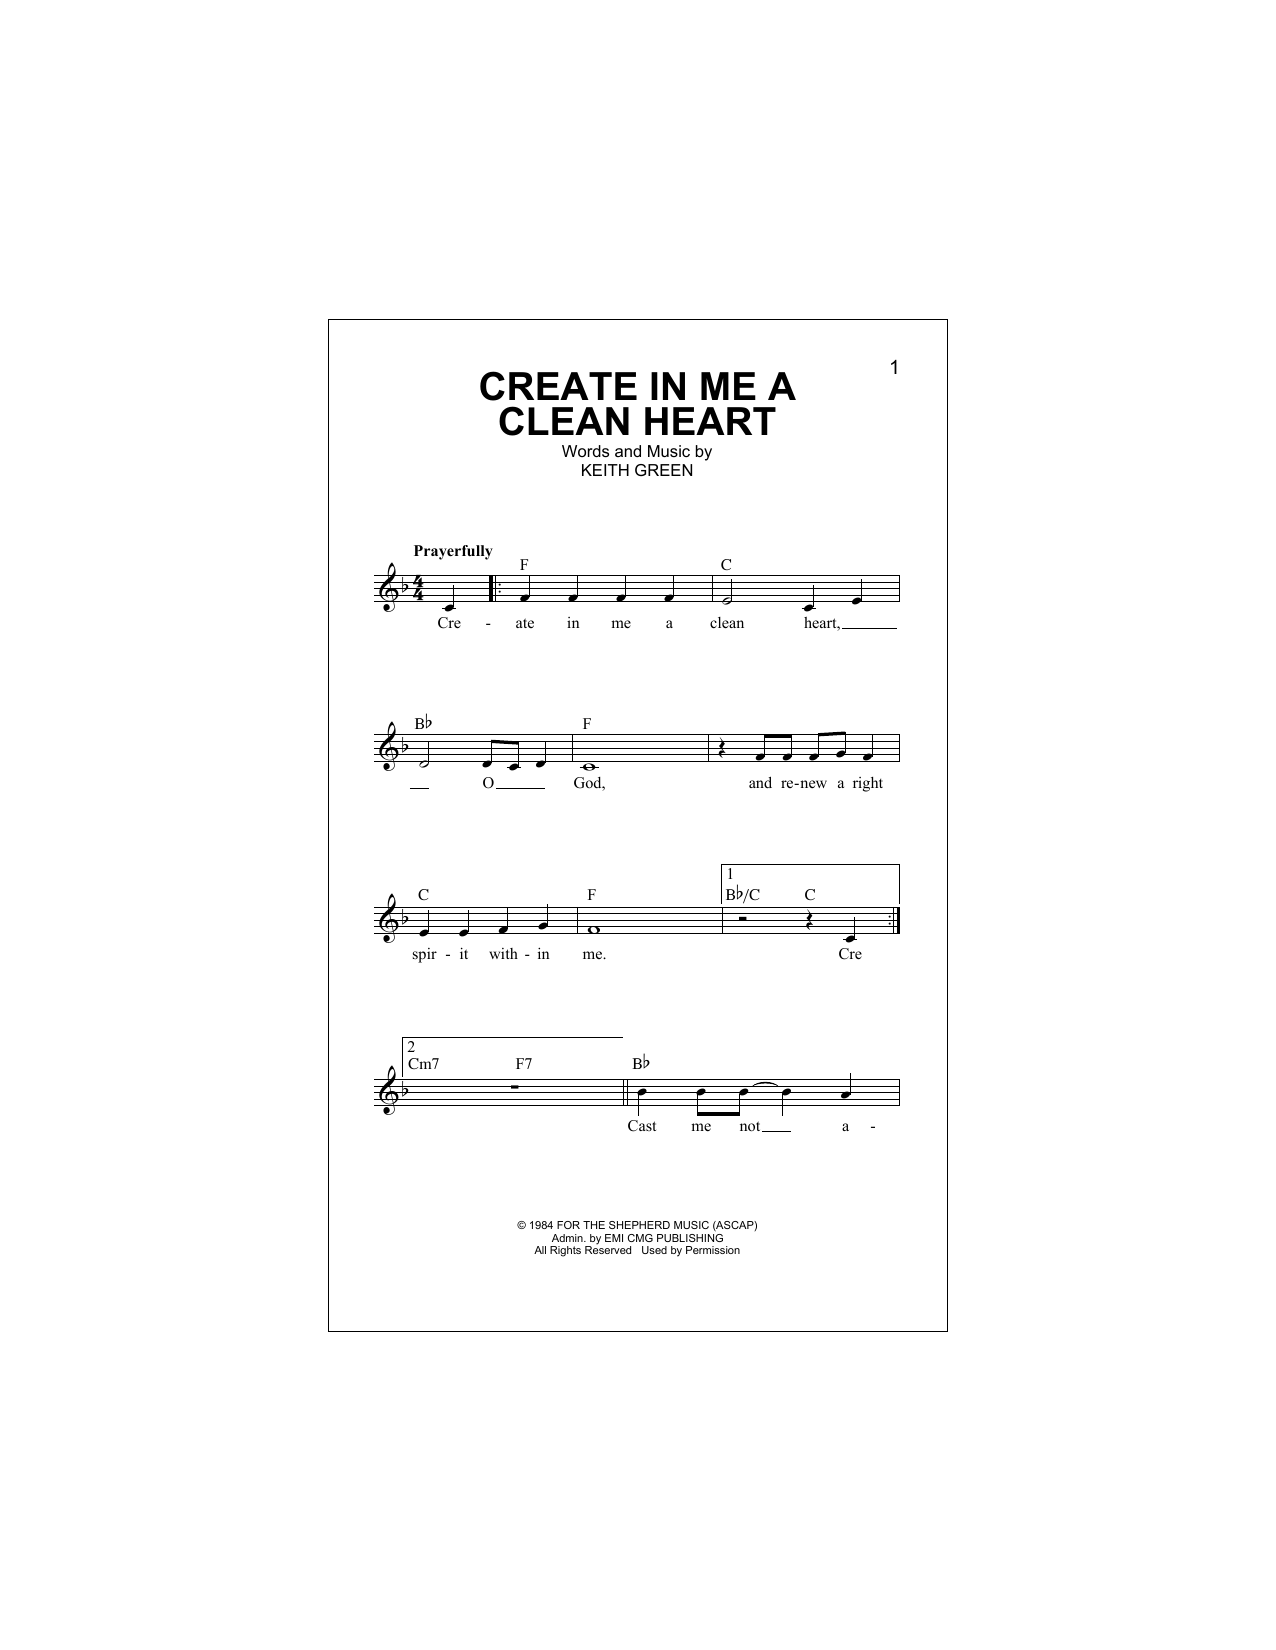 Download Keith Green Create In Me A Clean Heart Sheet Music